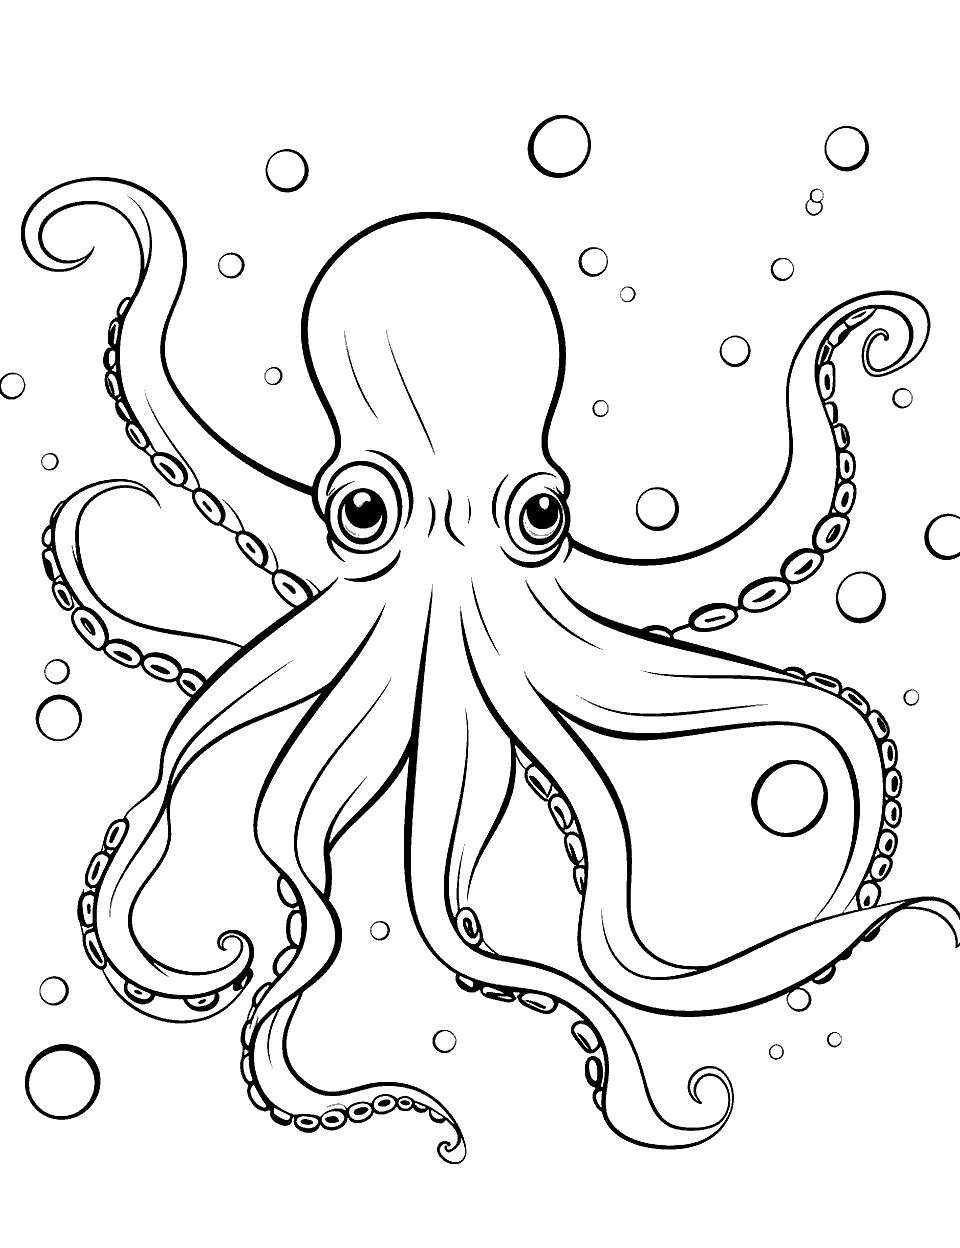 Blanket Octopus Gliding Through the Sea Coloring Page - A magnificent blanket octopus floating elegantly through the water.